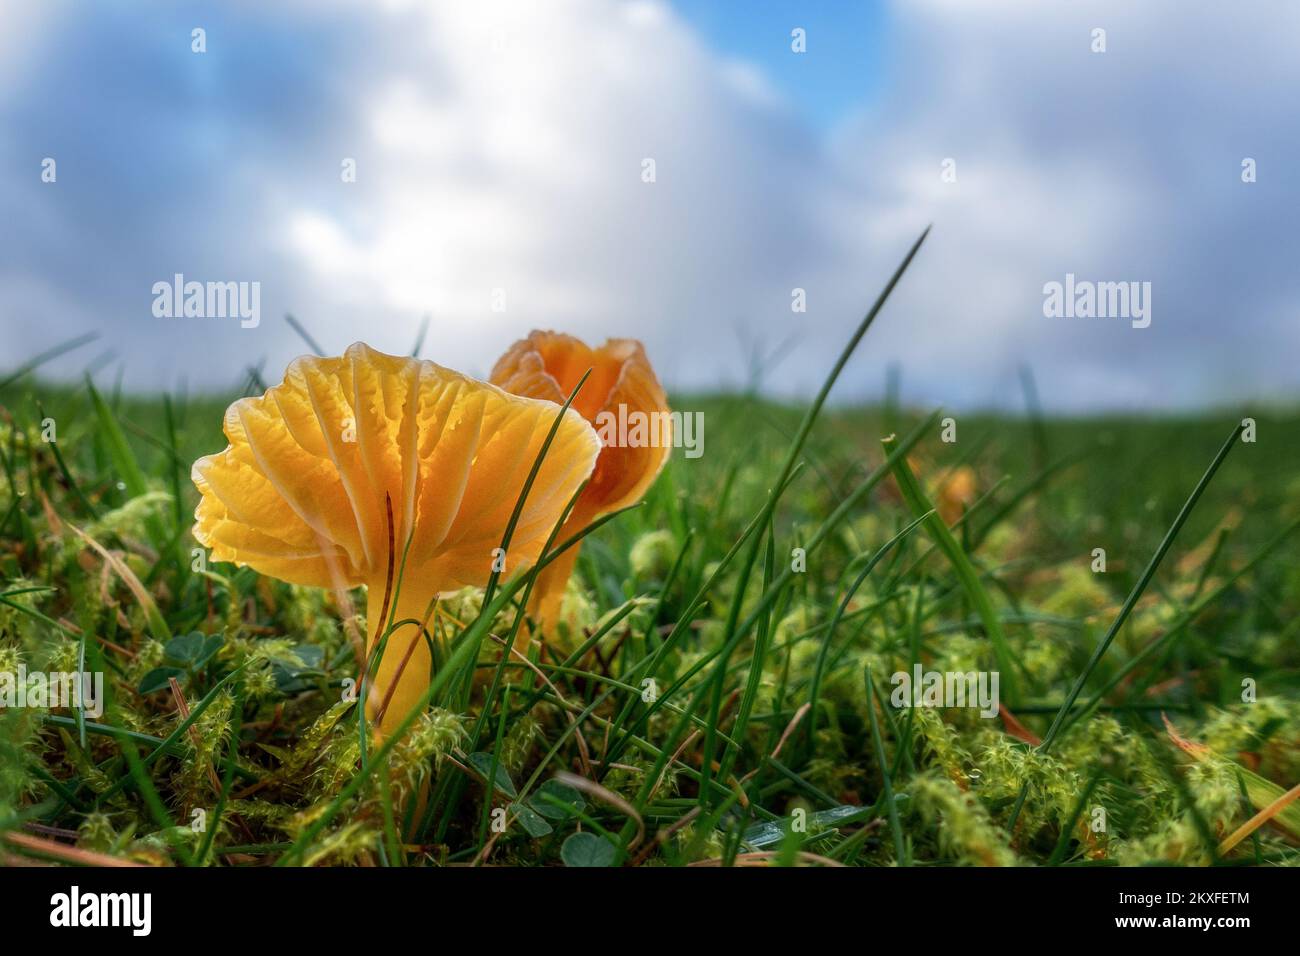 Golden Waxcaps (Hygrocybe chlorophana)  growing in association with mosses in a field and lit by sunshine, UK Stock Photo